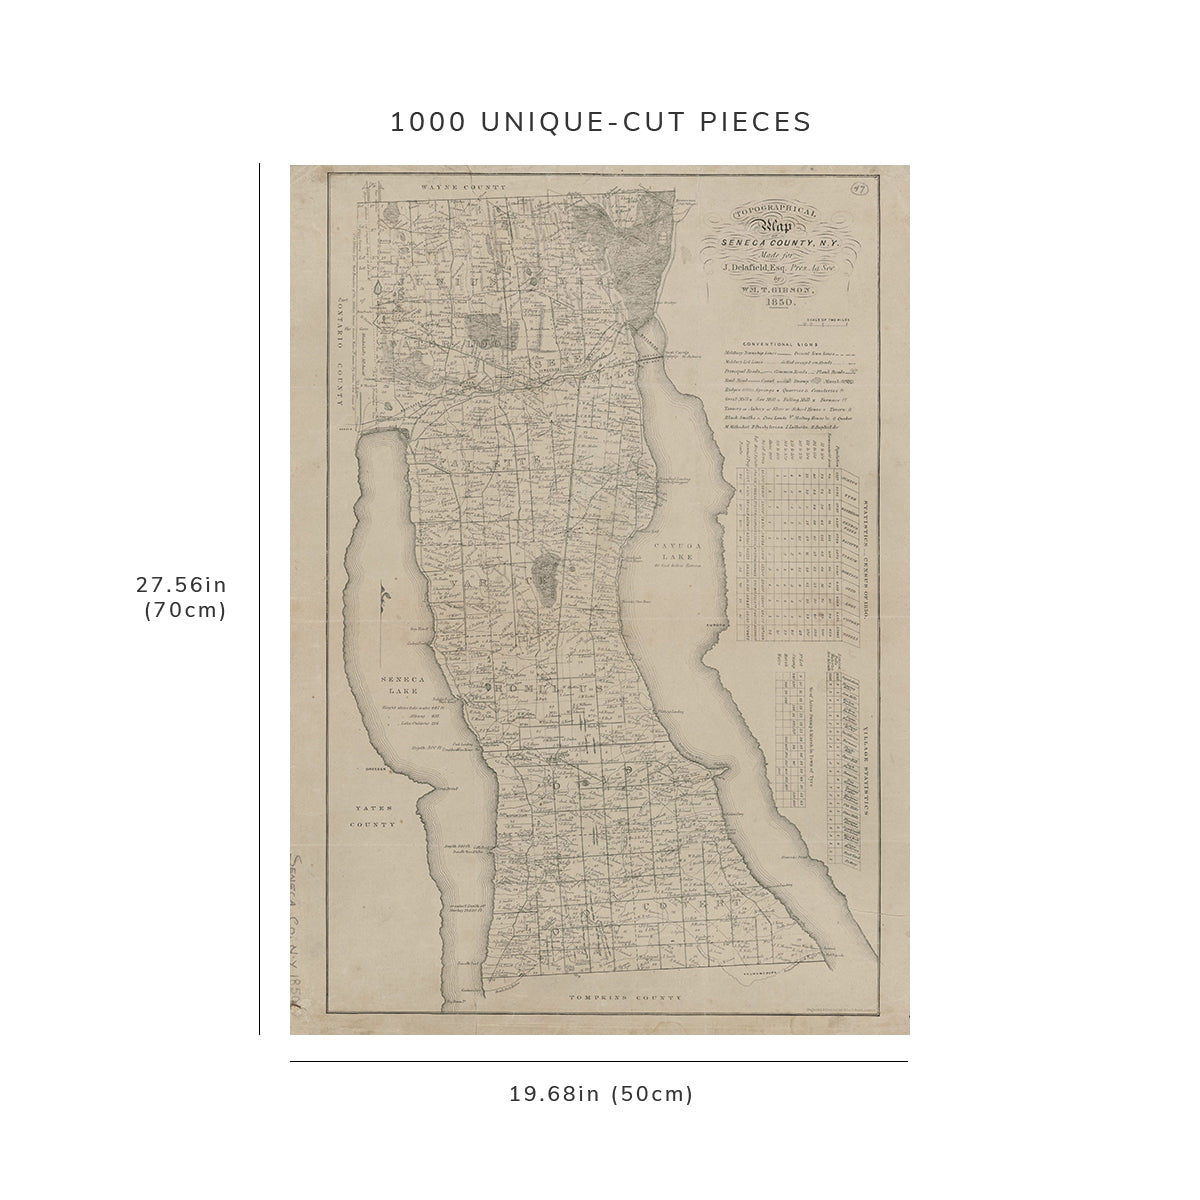 1000 Piece Jigsaw Puzzle: 1850 Map of Albany, N.Y. Topographical Map of Seneca County